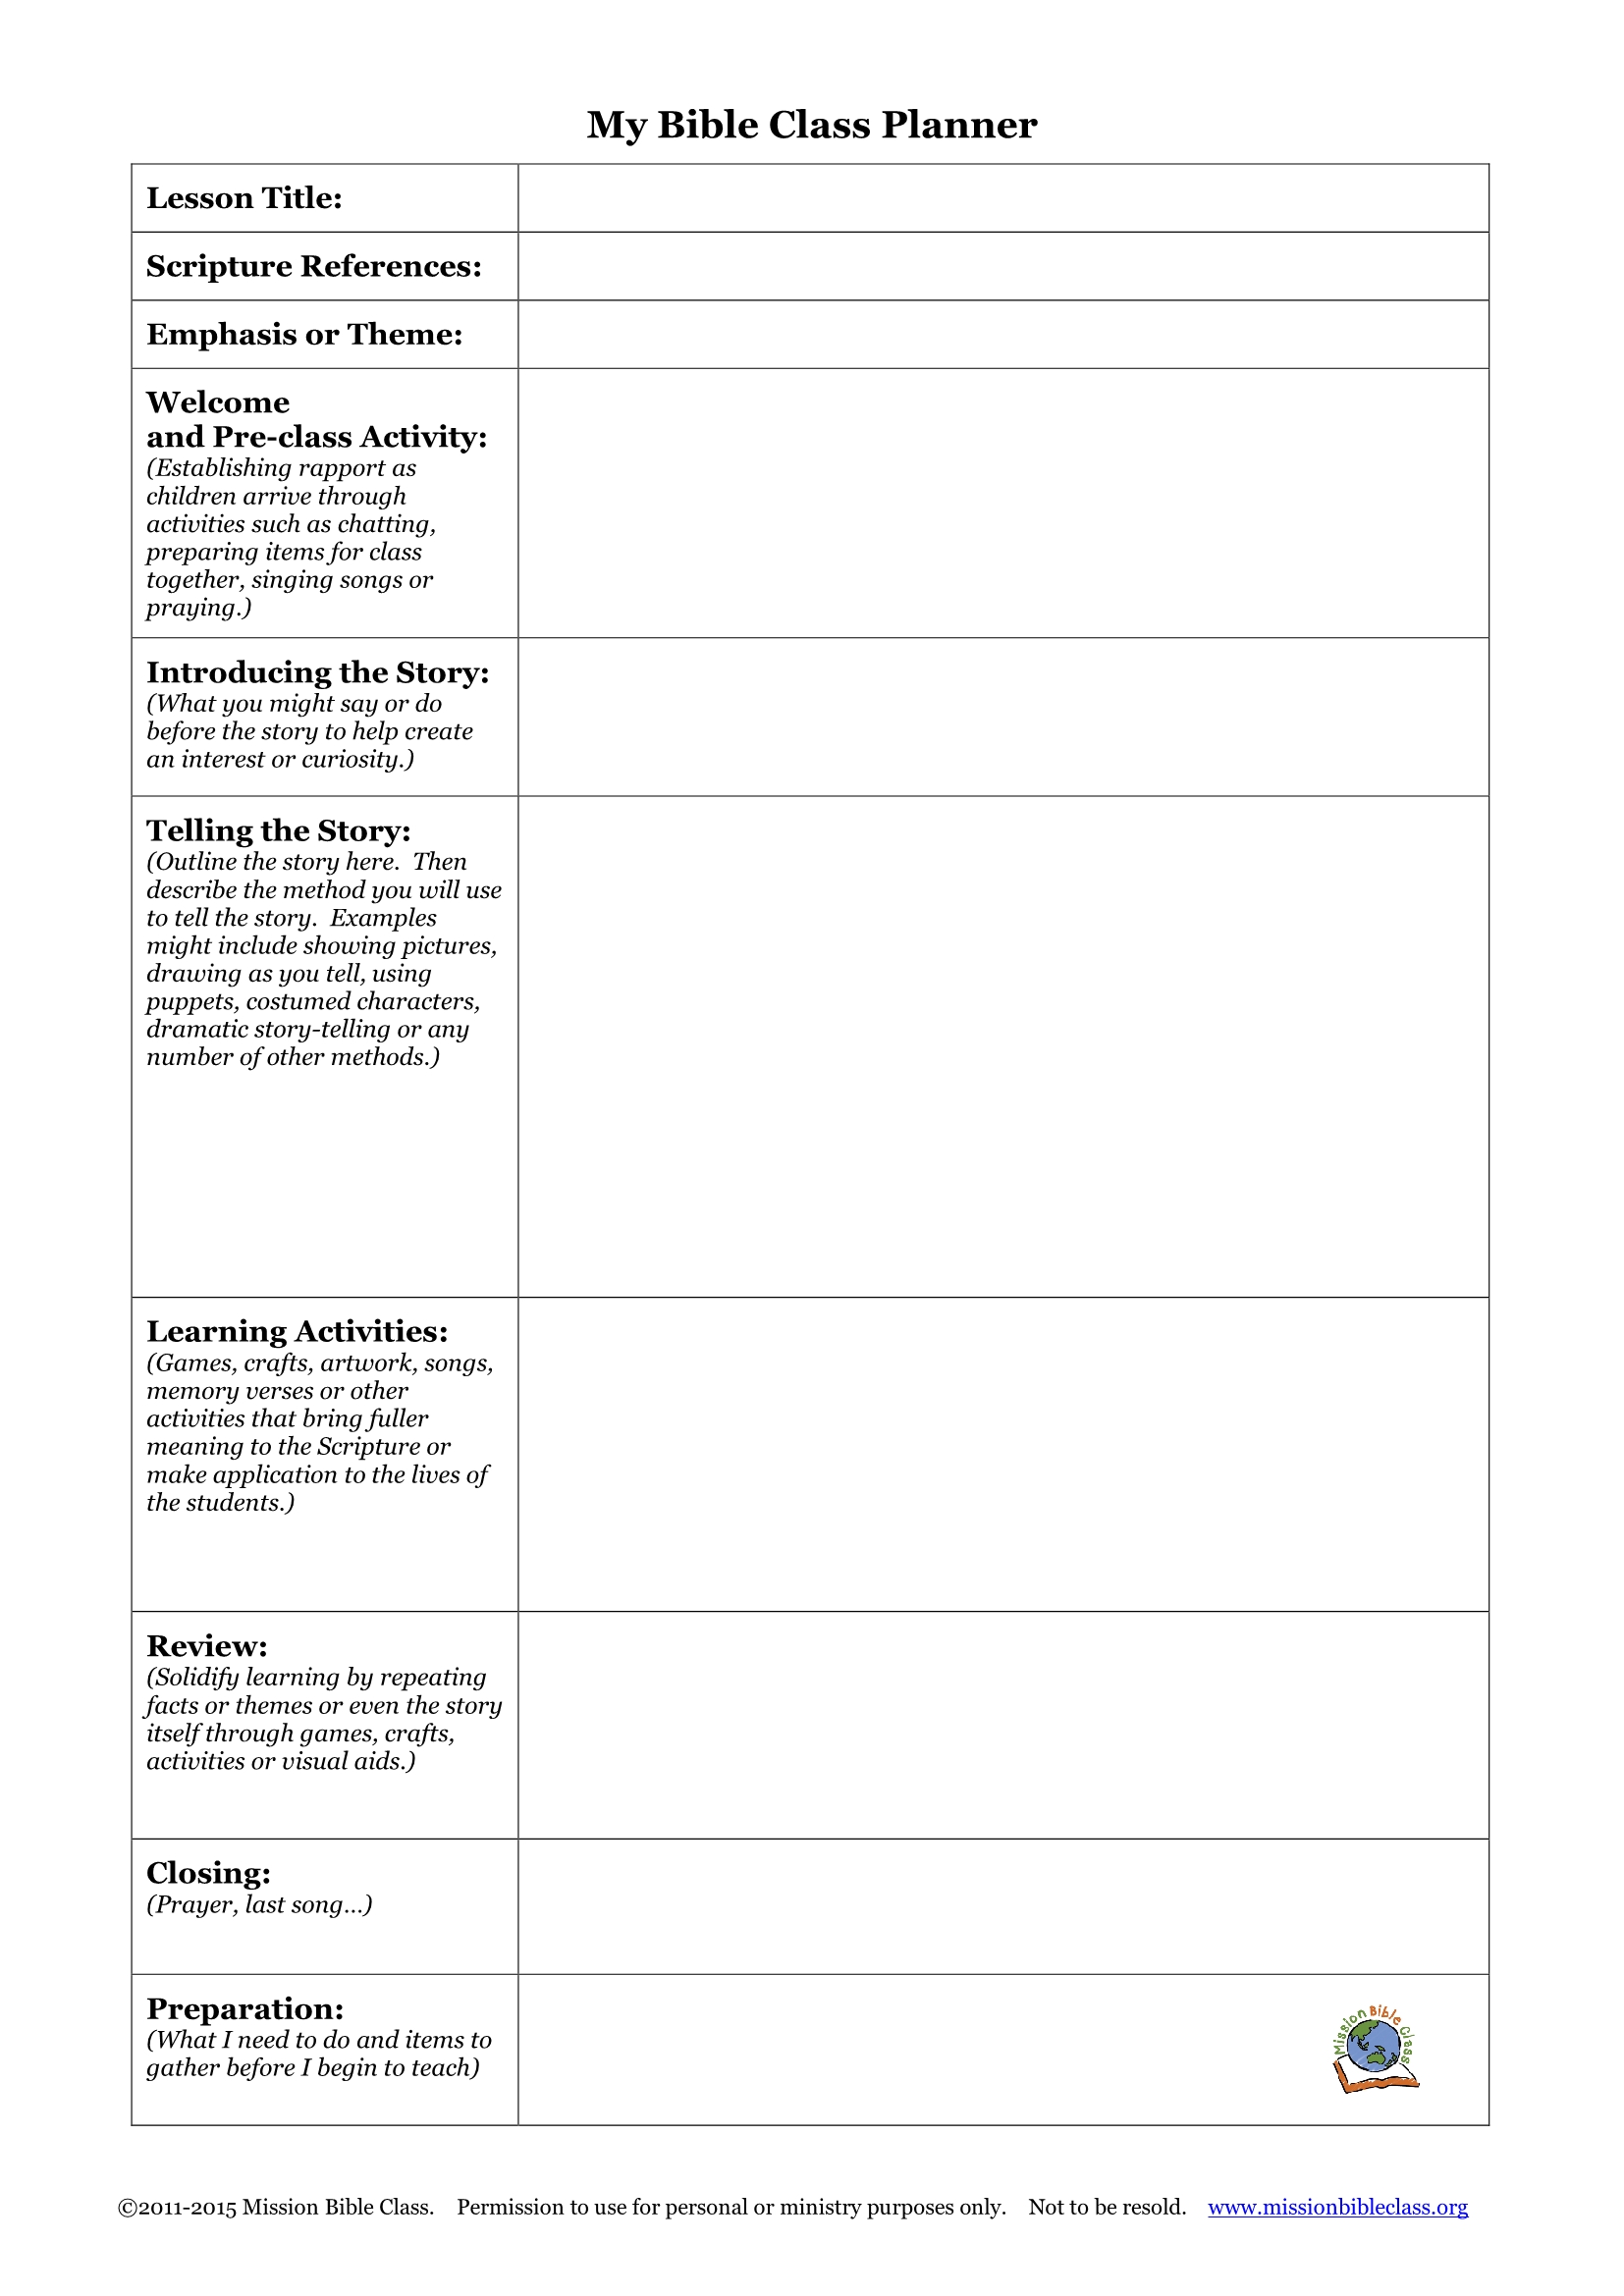 Blank Lesson Plan Templates To Print – Mission Bible Class  Lesson Plan Template For Church Printable